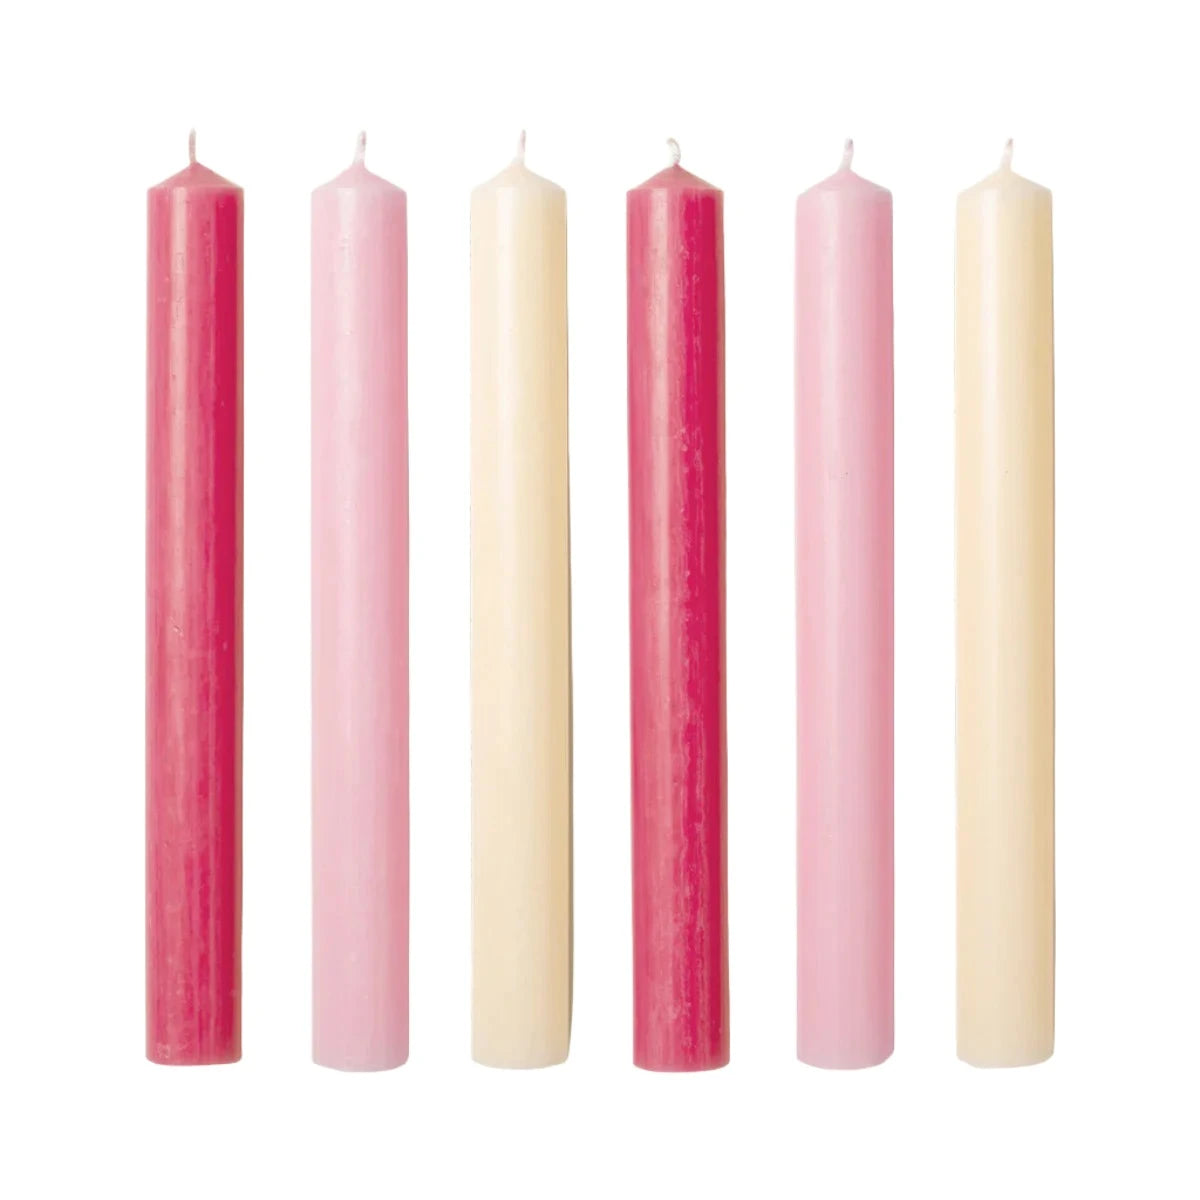 Les Dinner Candles in Pink